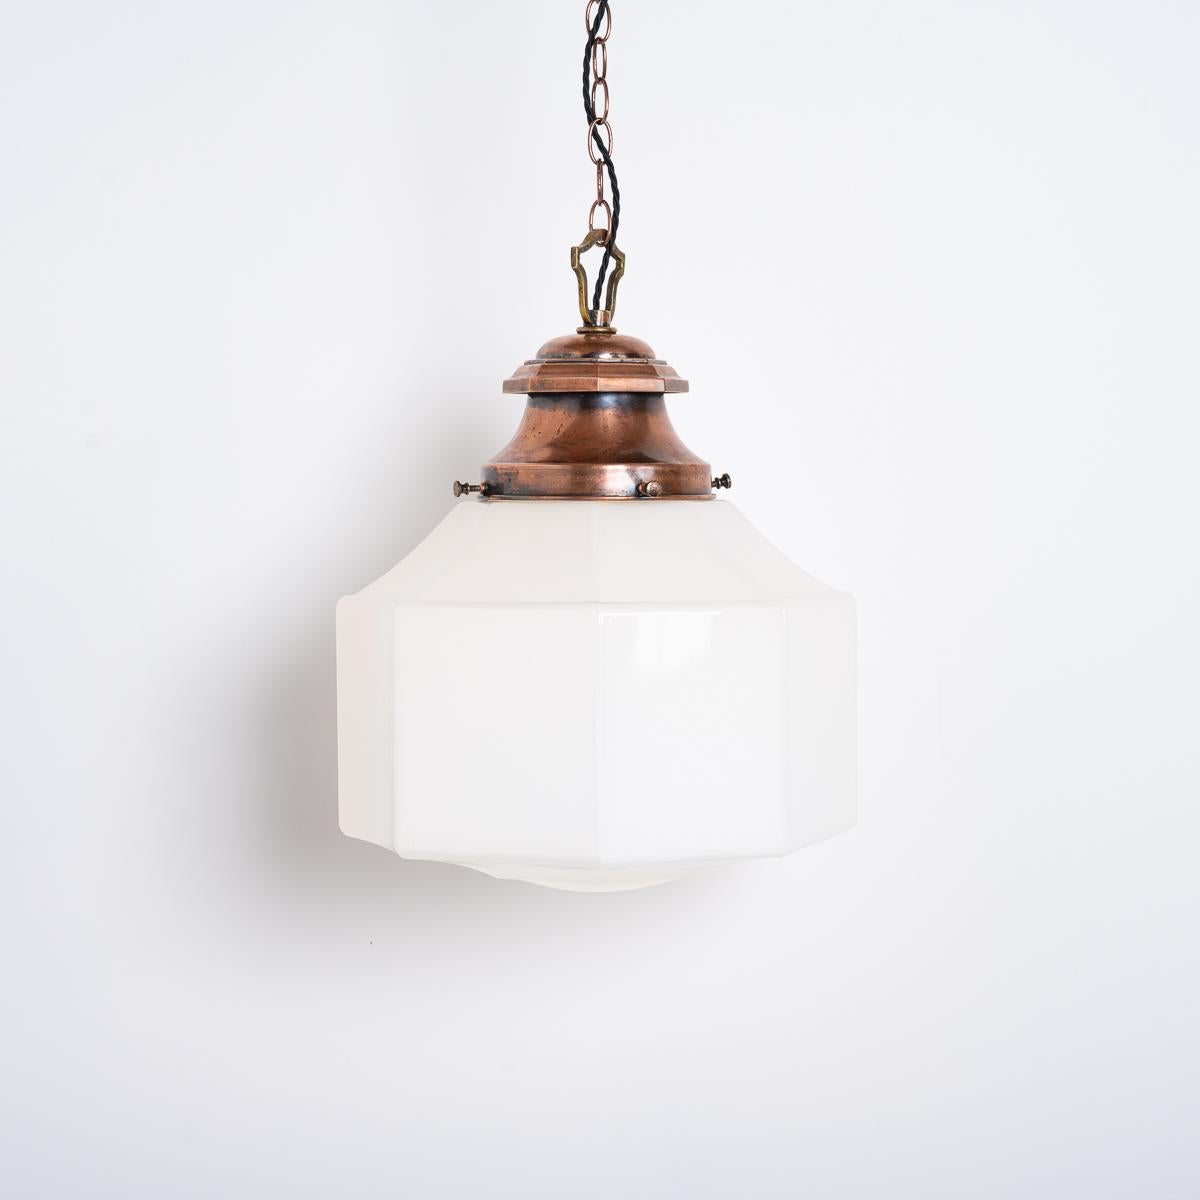 Mid-20th Century Extra Large Vintage Octagonal Opaline Pendant Light with Cast Copper Canopy